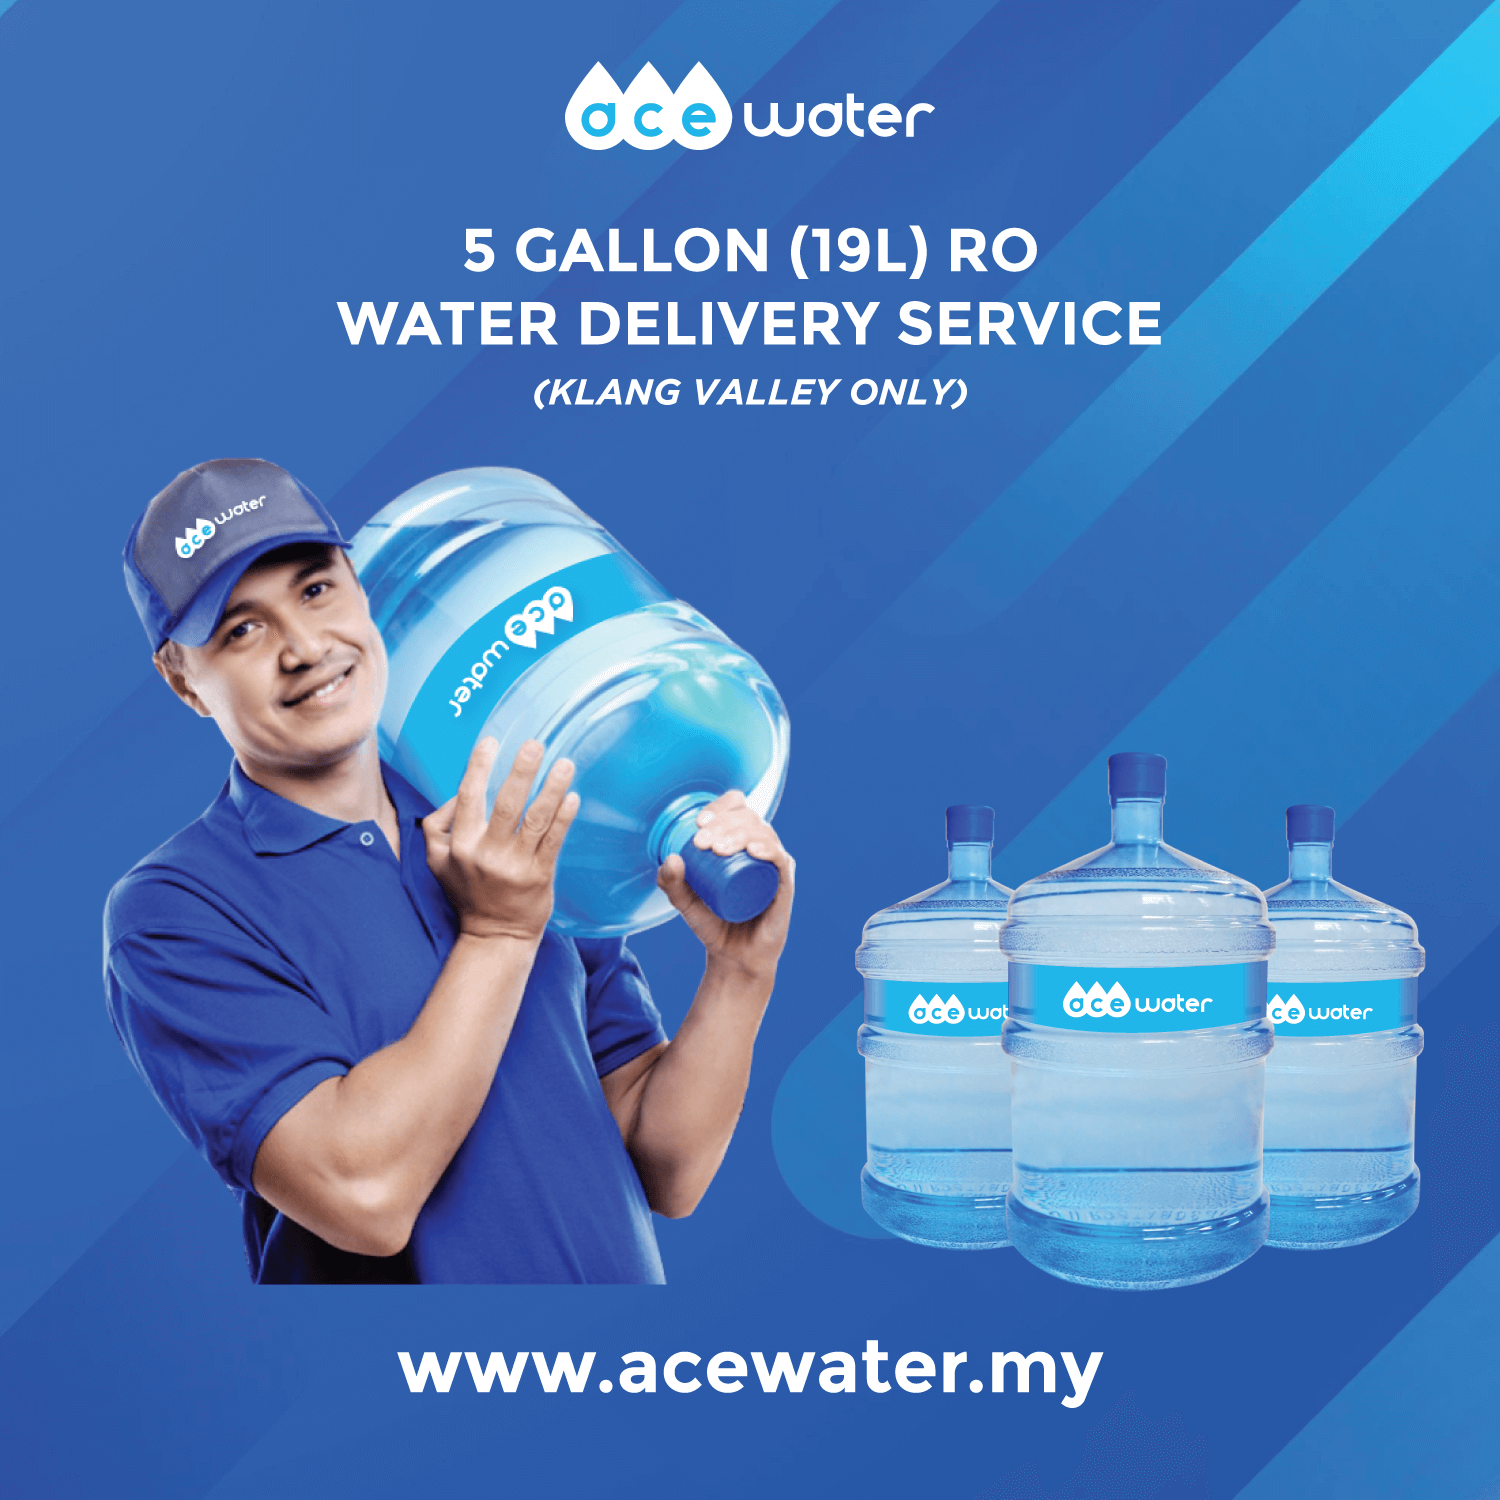 https://acewater.my/wp-content/uploads/2022/03/19L-5-GALLON-RO-WATER-DELIVERY-SERVICE-KUALA-LUMPUR-SELANGOR-2.png